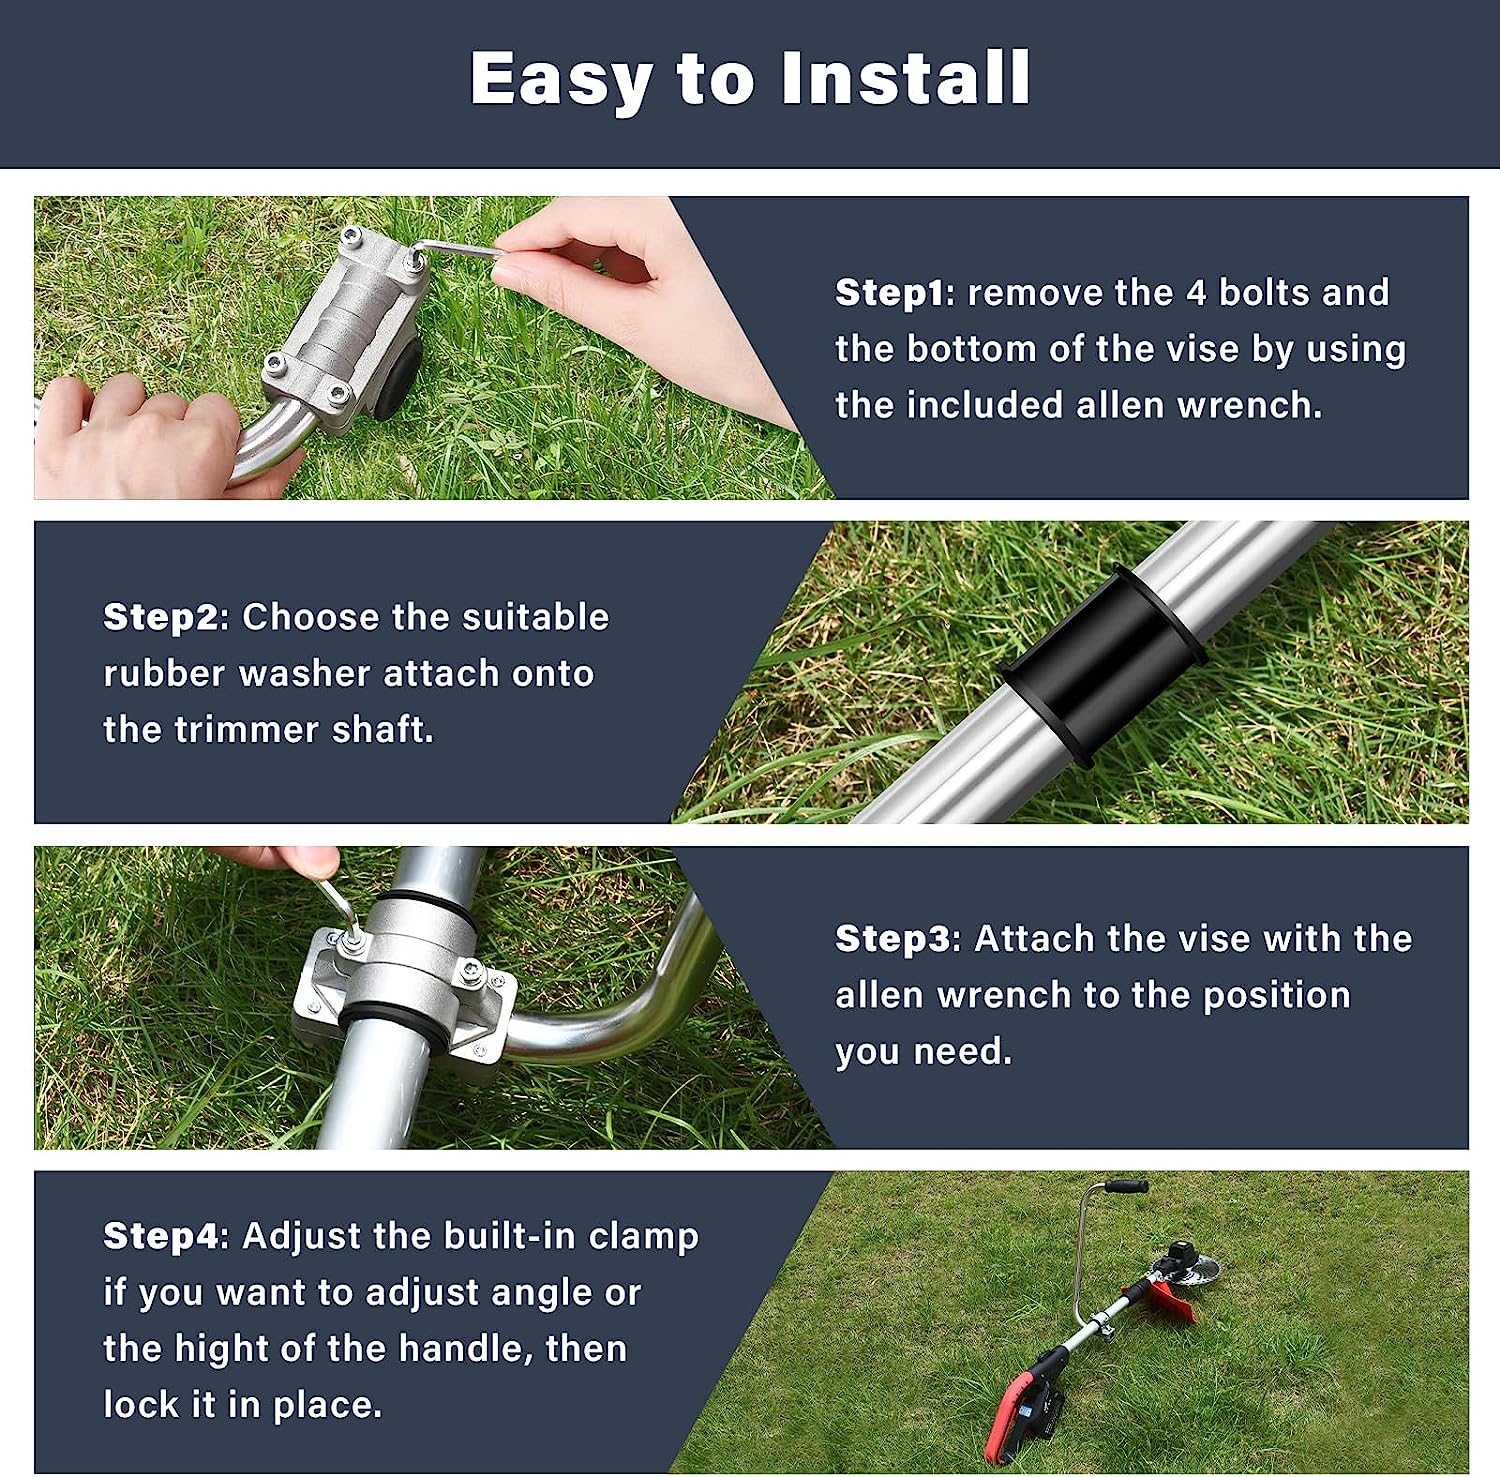 Ergonomic Trimmer Grip, String Trimmers Handle, Weed Eater Handle Extension with Bracket Clamp, Lawn Trimmer Handle Grip for Lawn Care, Landscaping, Yard Trimming Edging, Aluminum